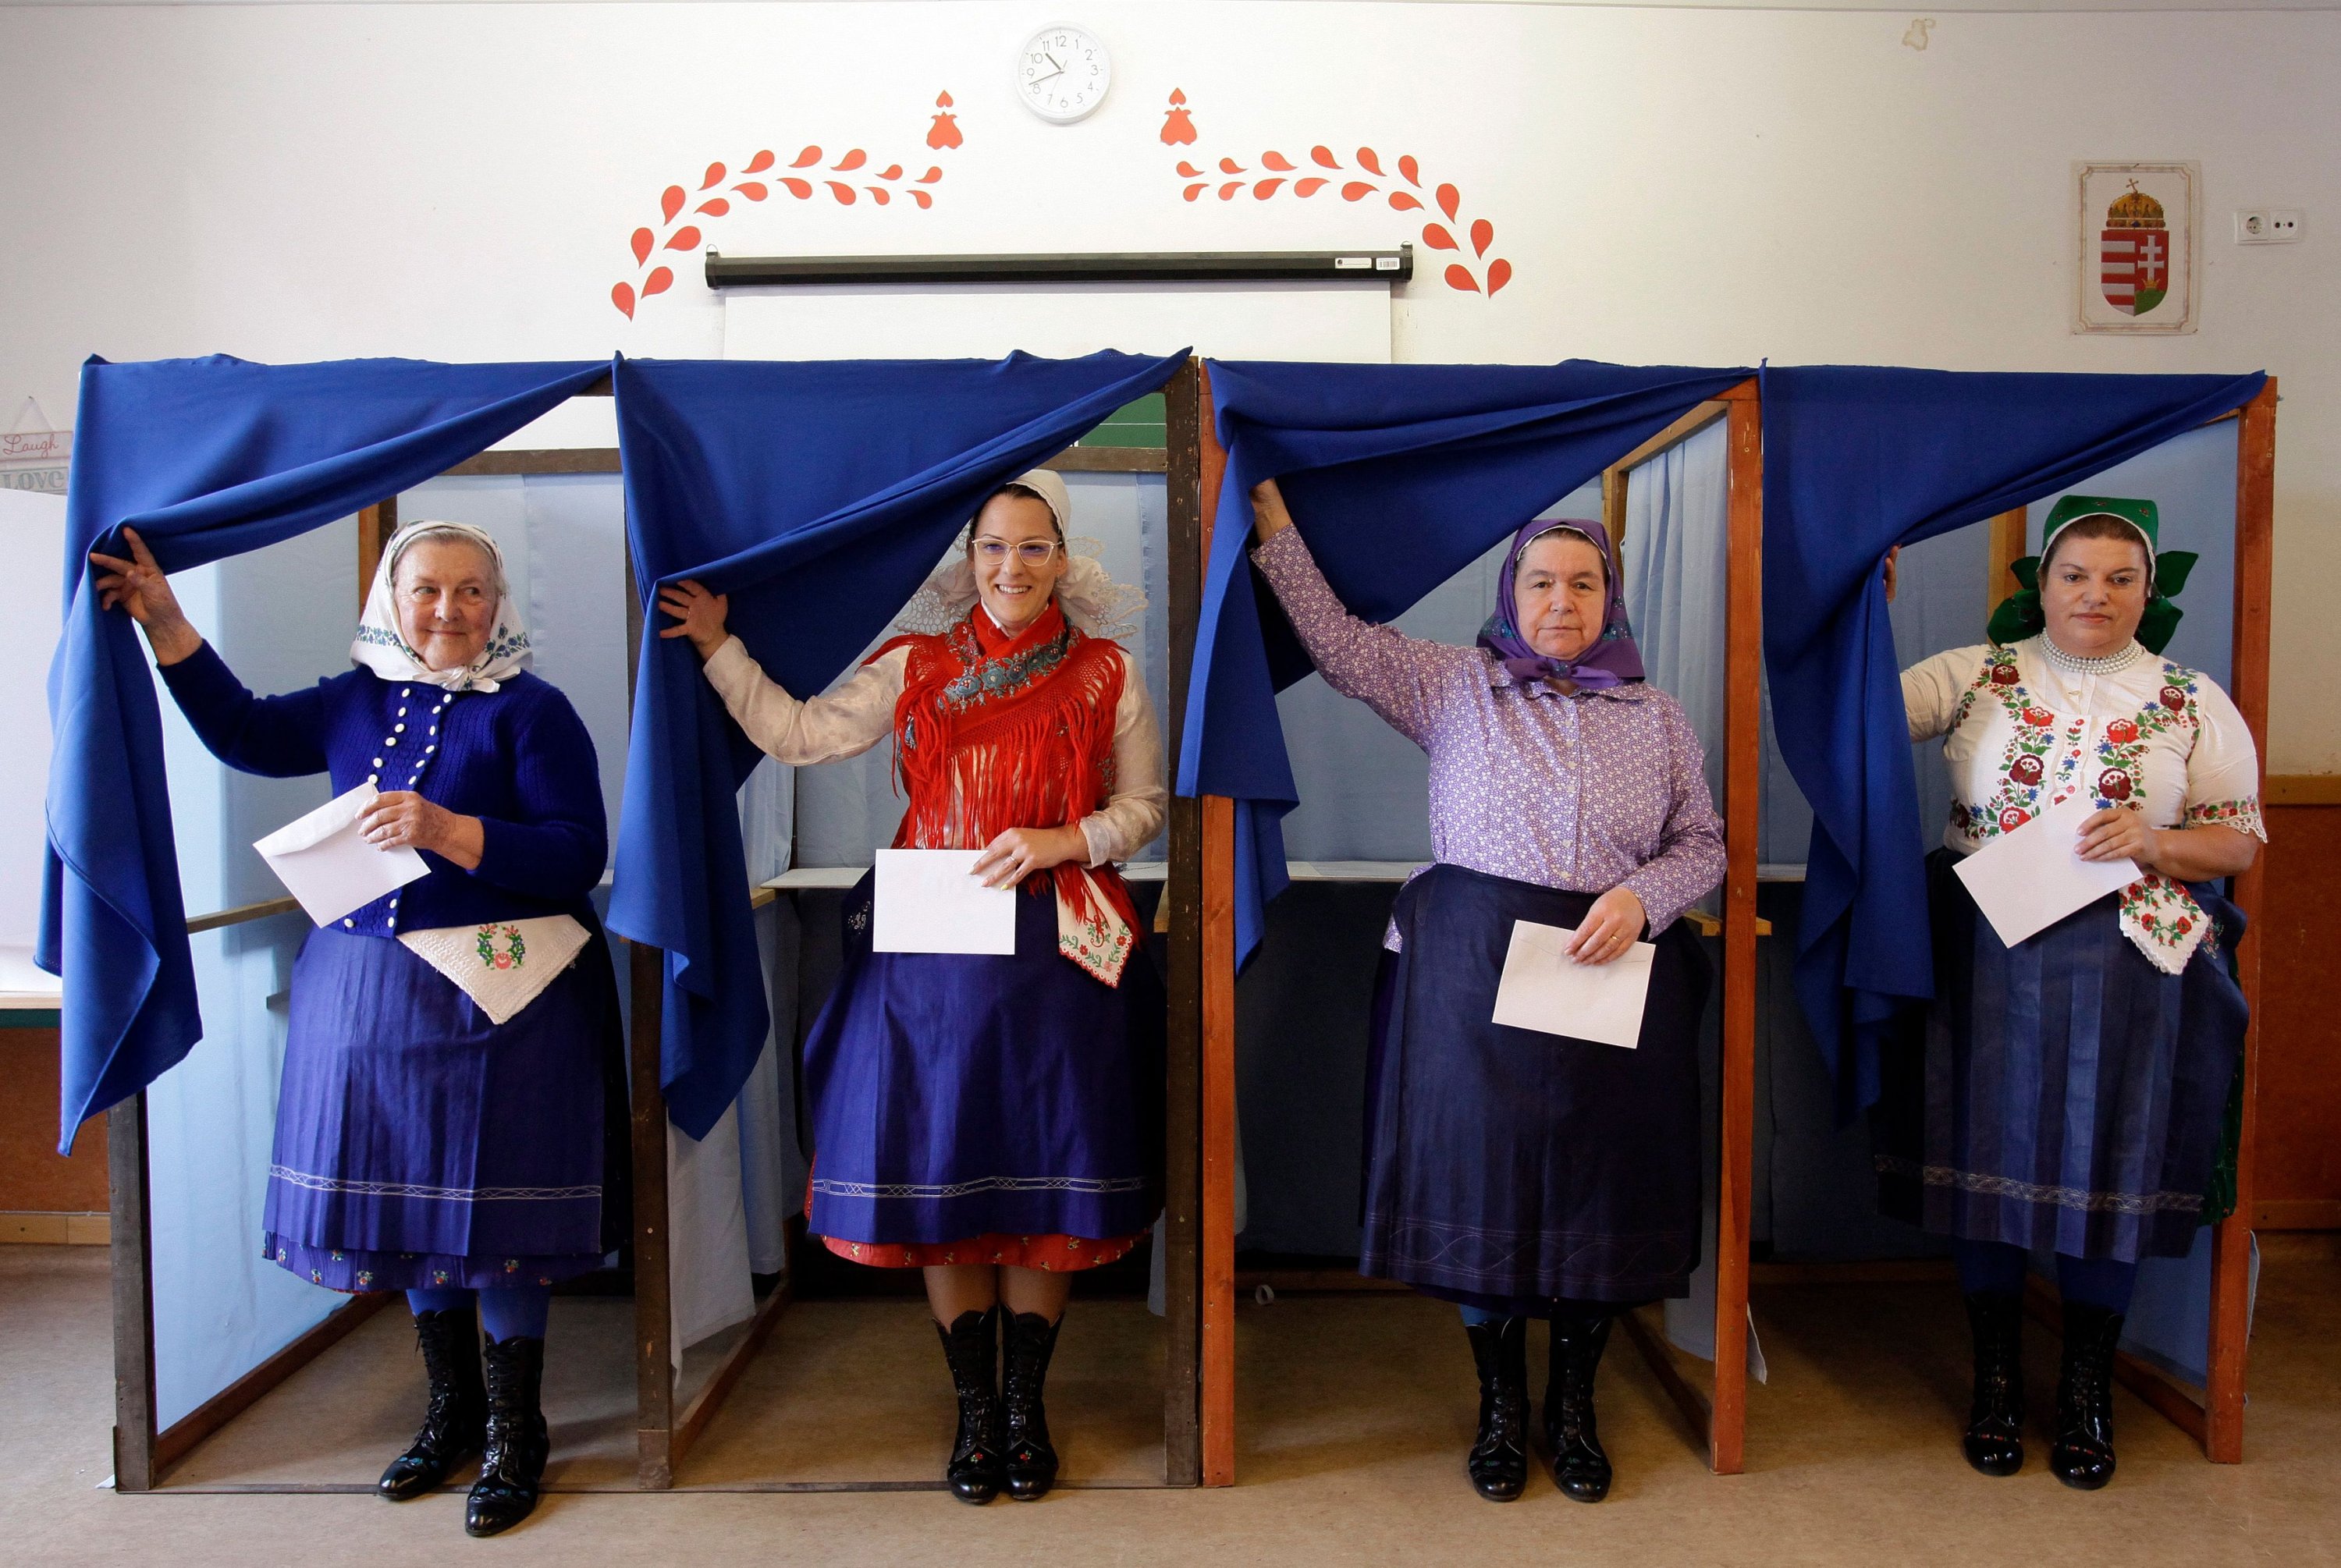 Women in traditional Hungarian dresses leave polling booths and prepare to cast their ballots at a polling station in a school in Veresegyhaz, 30 kilometers (18.64 miles) east of Budapest, Hungary, April 3, 2022. (AFP Photo)